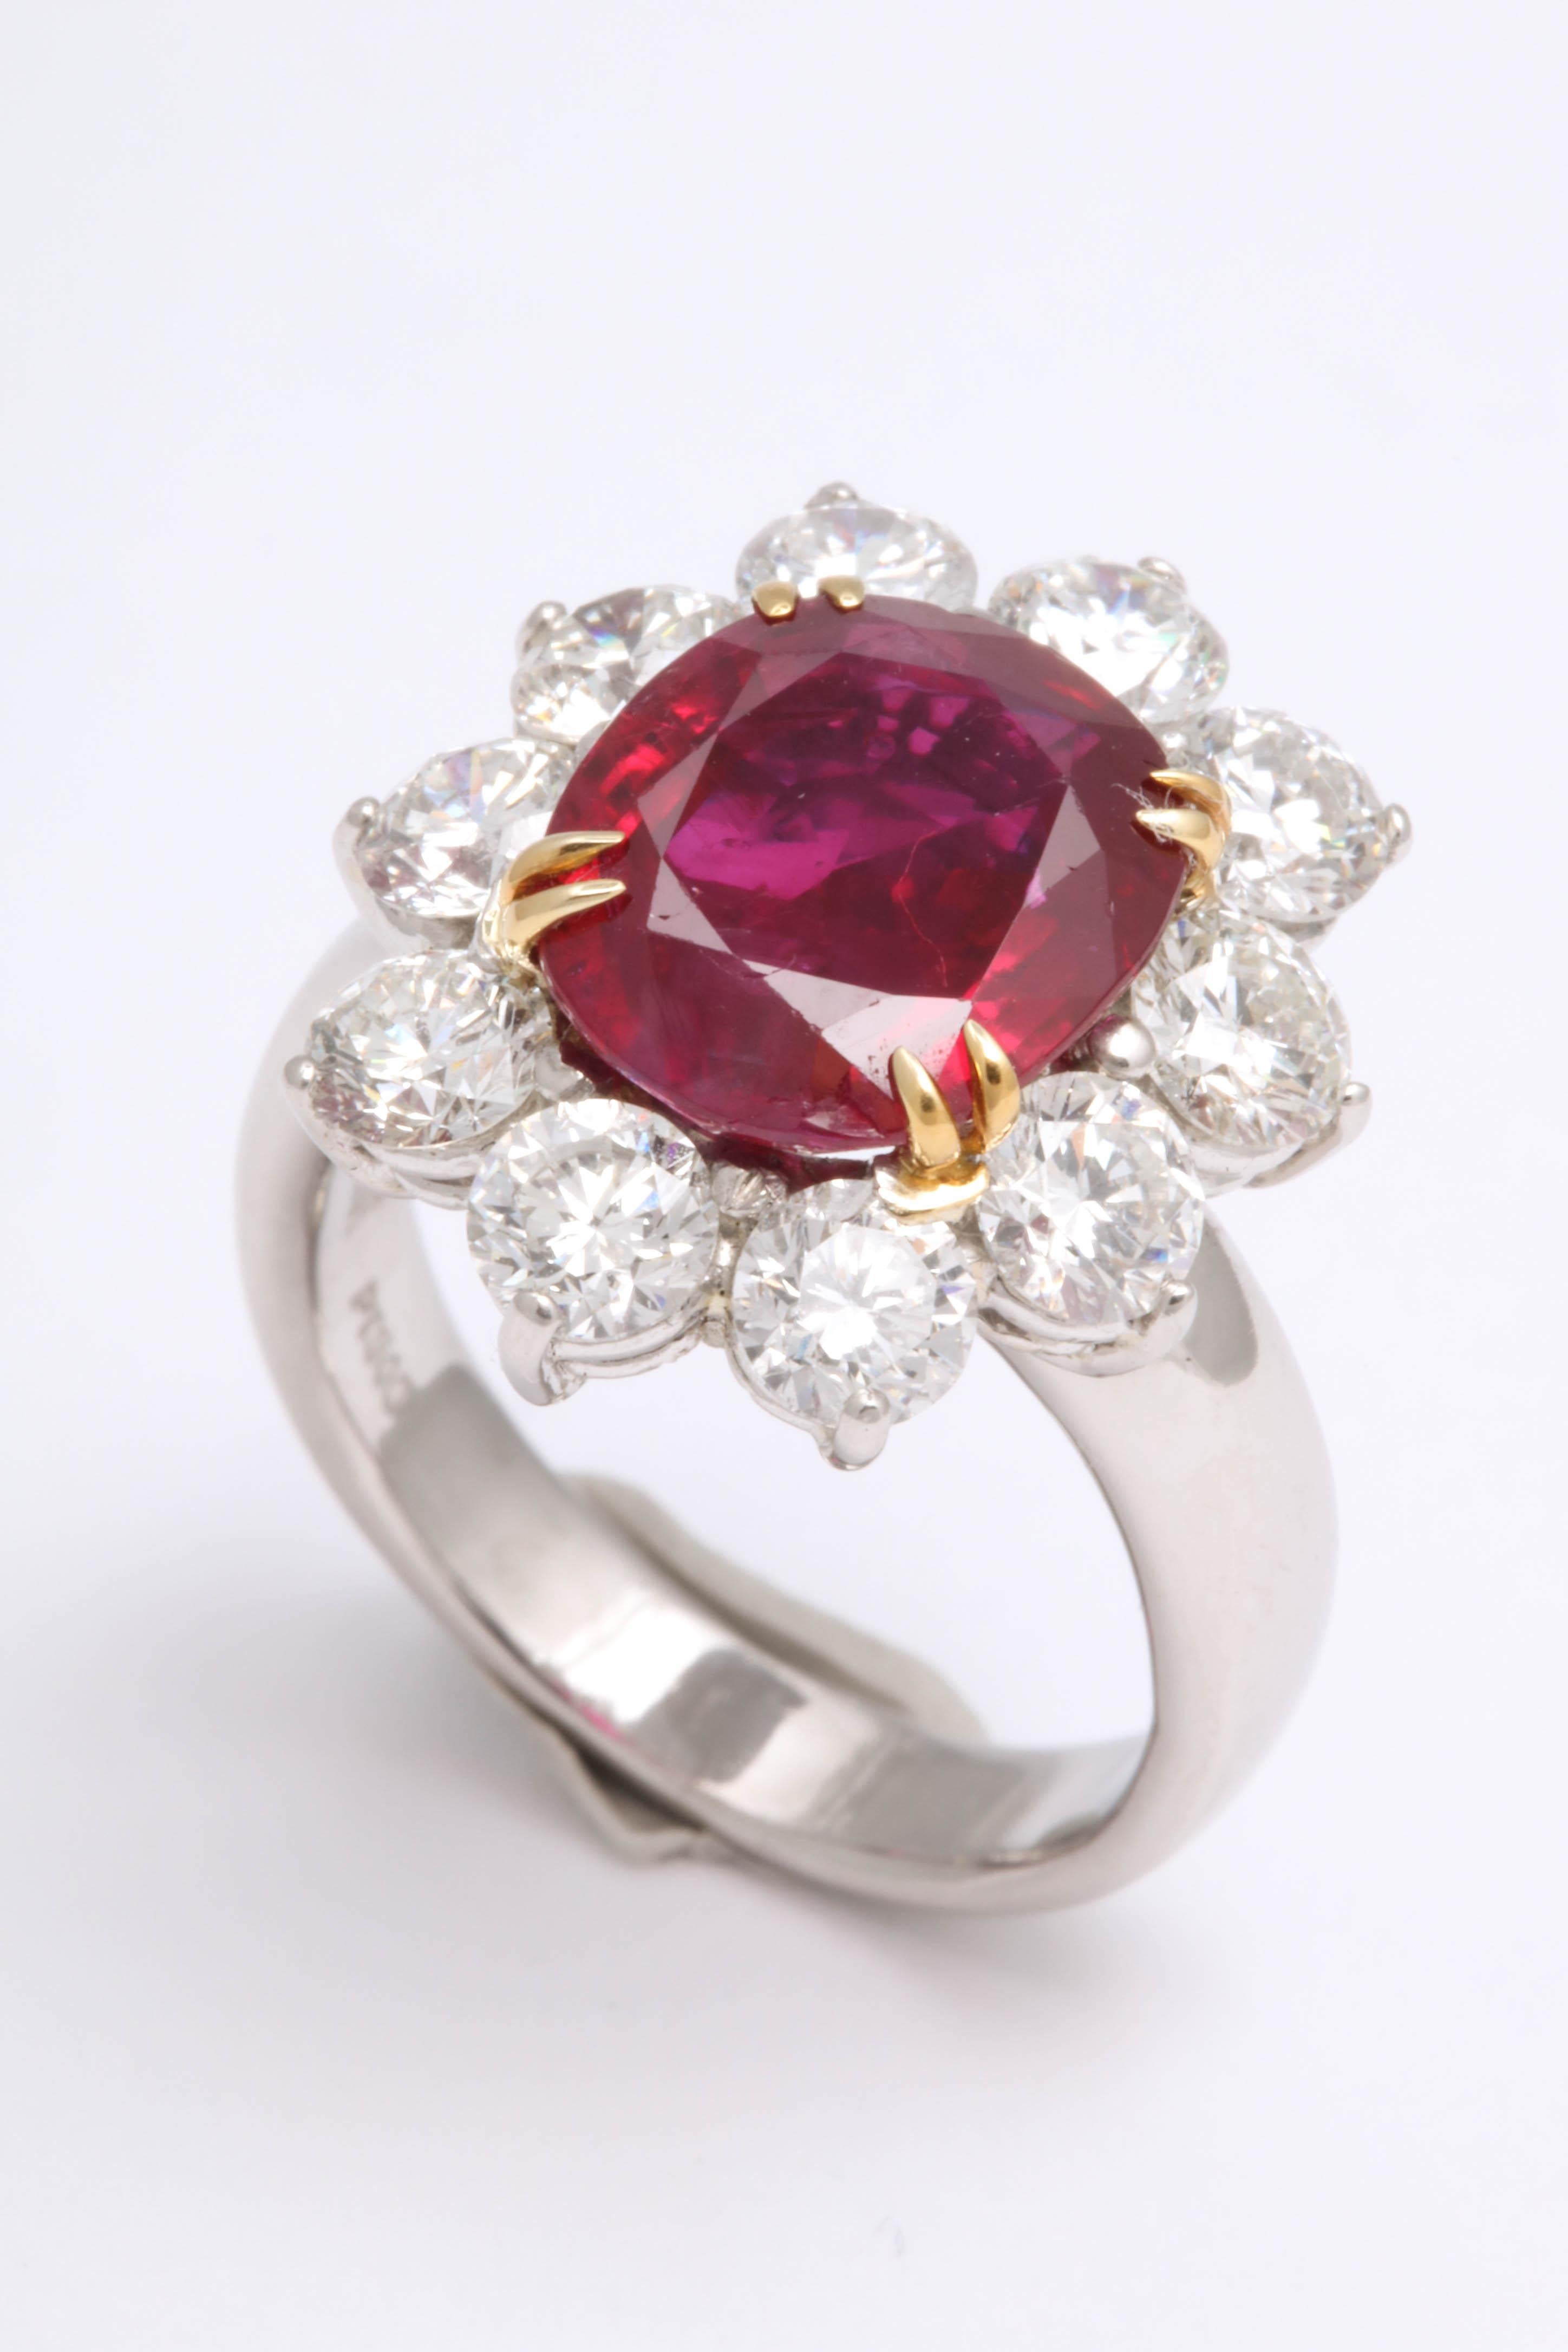 5 Carat No Heat Burma Ruby Diamond Ring In New Condition For Sale In New York, NY